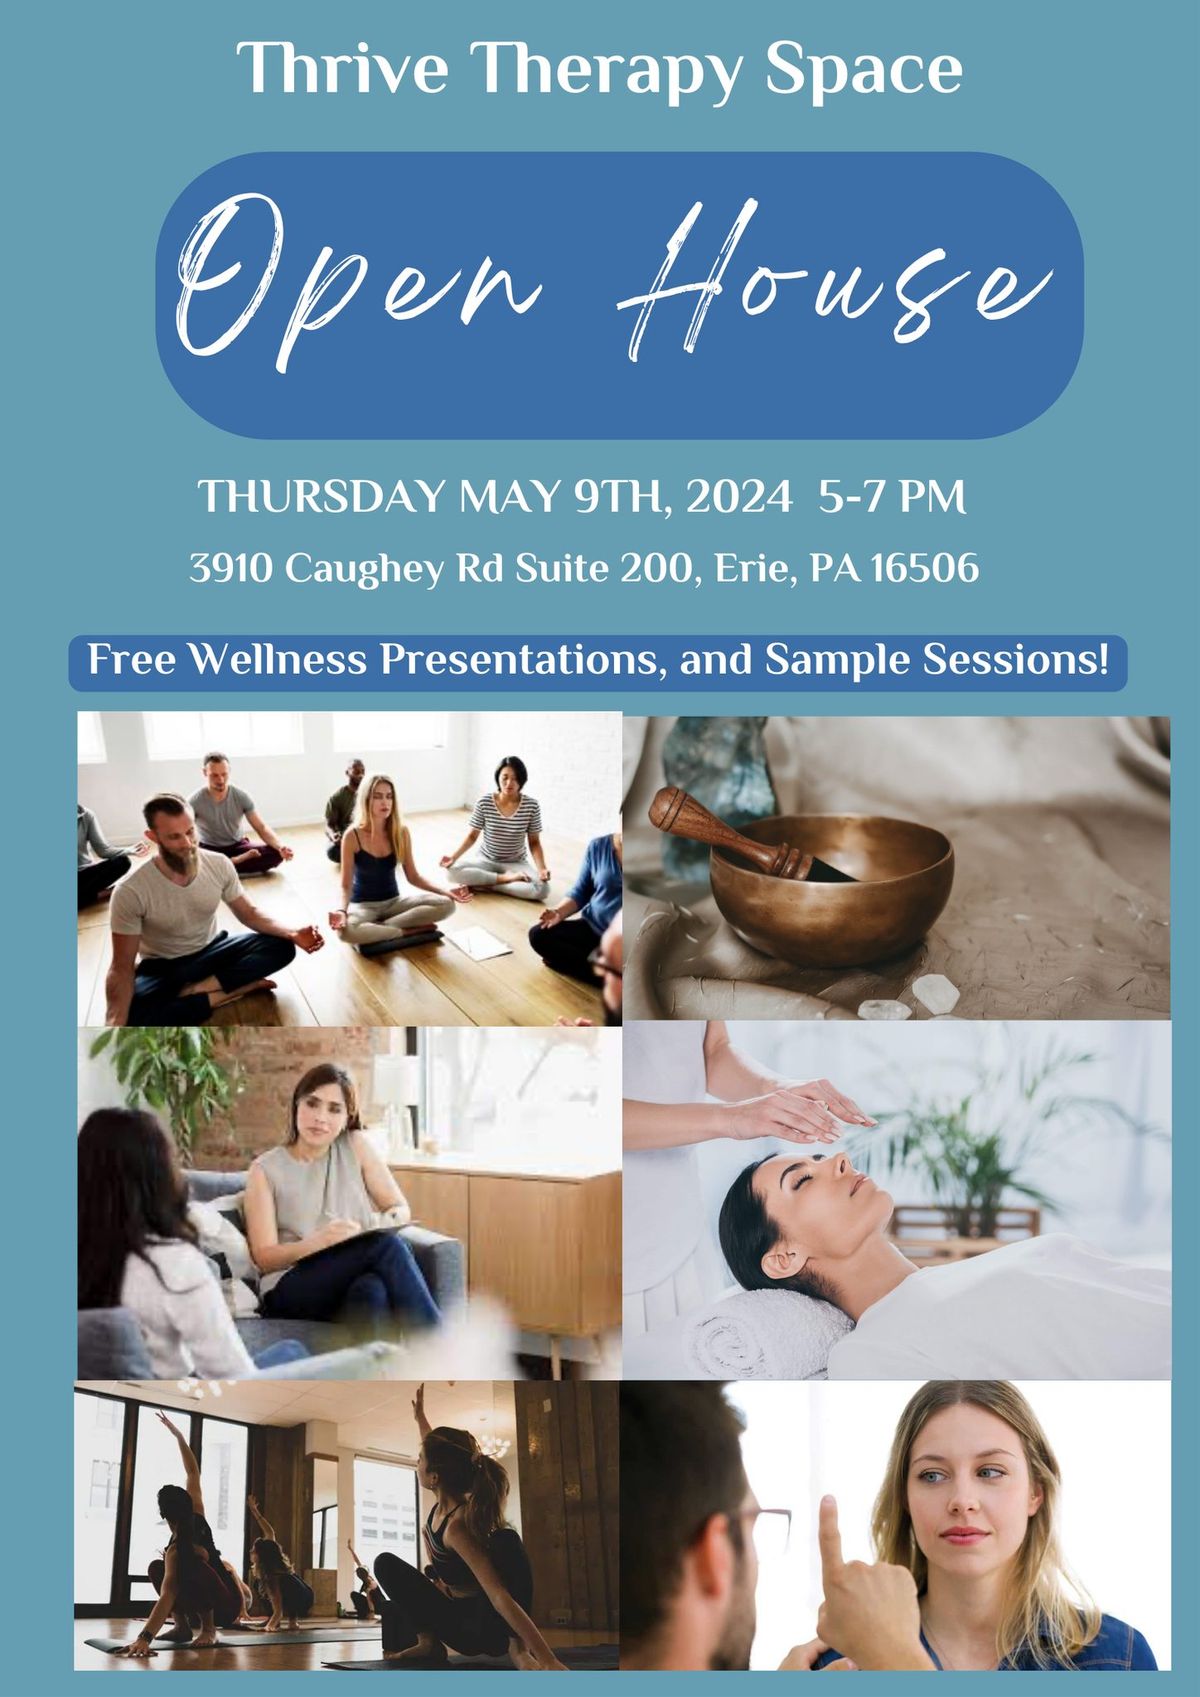 Open House - Thrive Therapy Space 